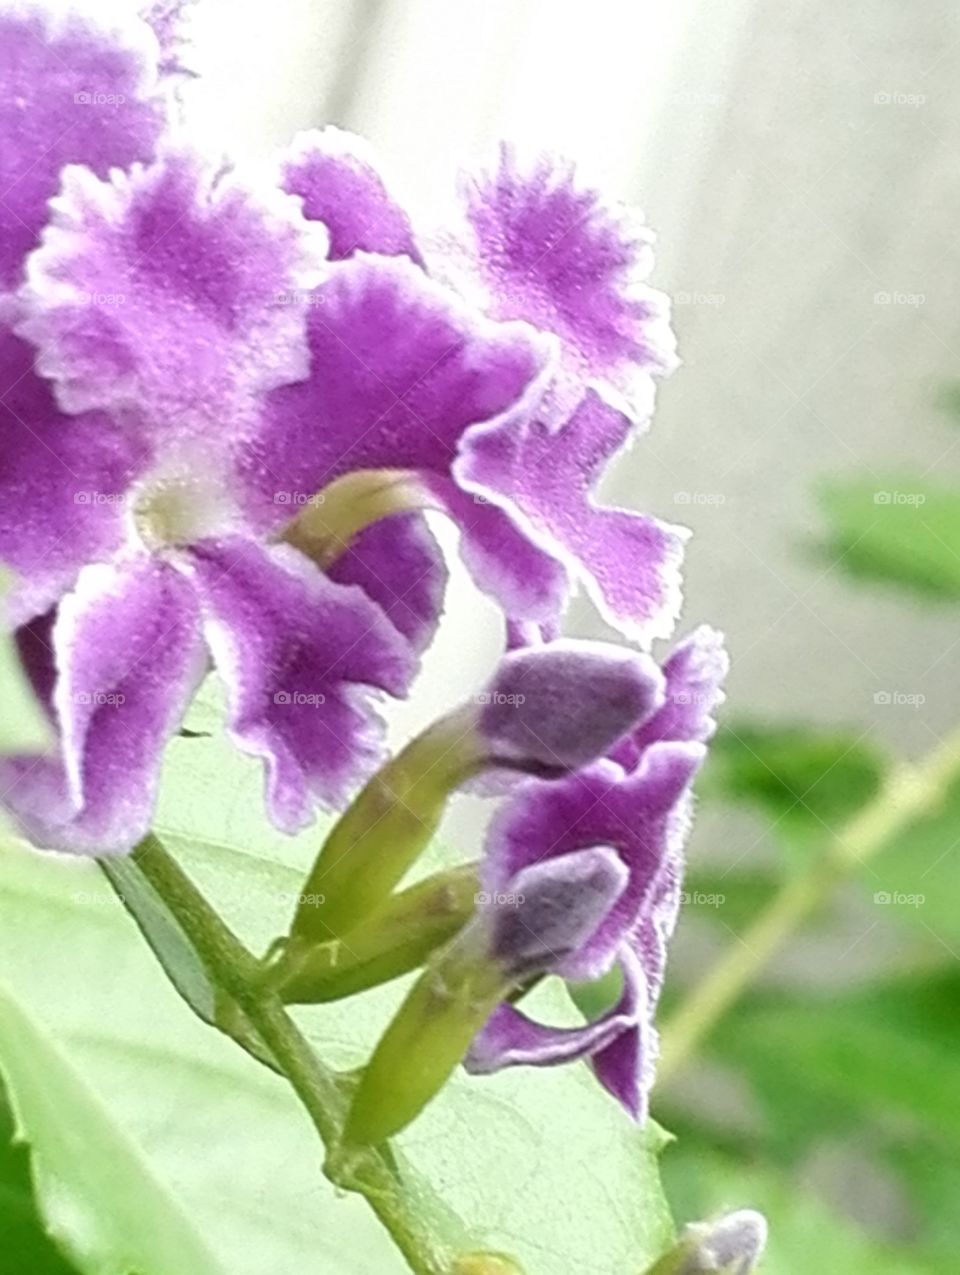 Duranta flower and bud